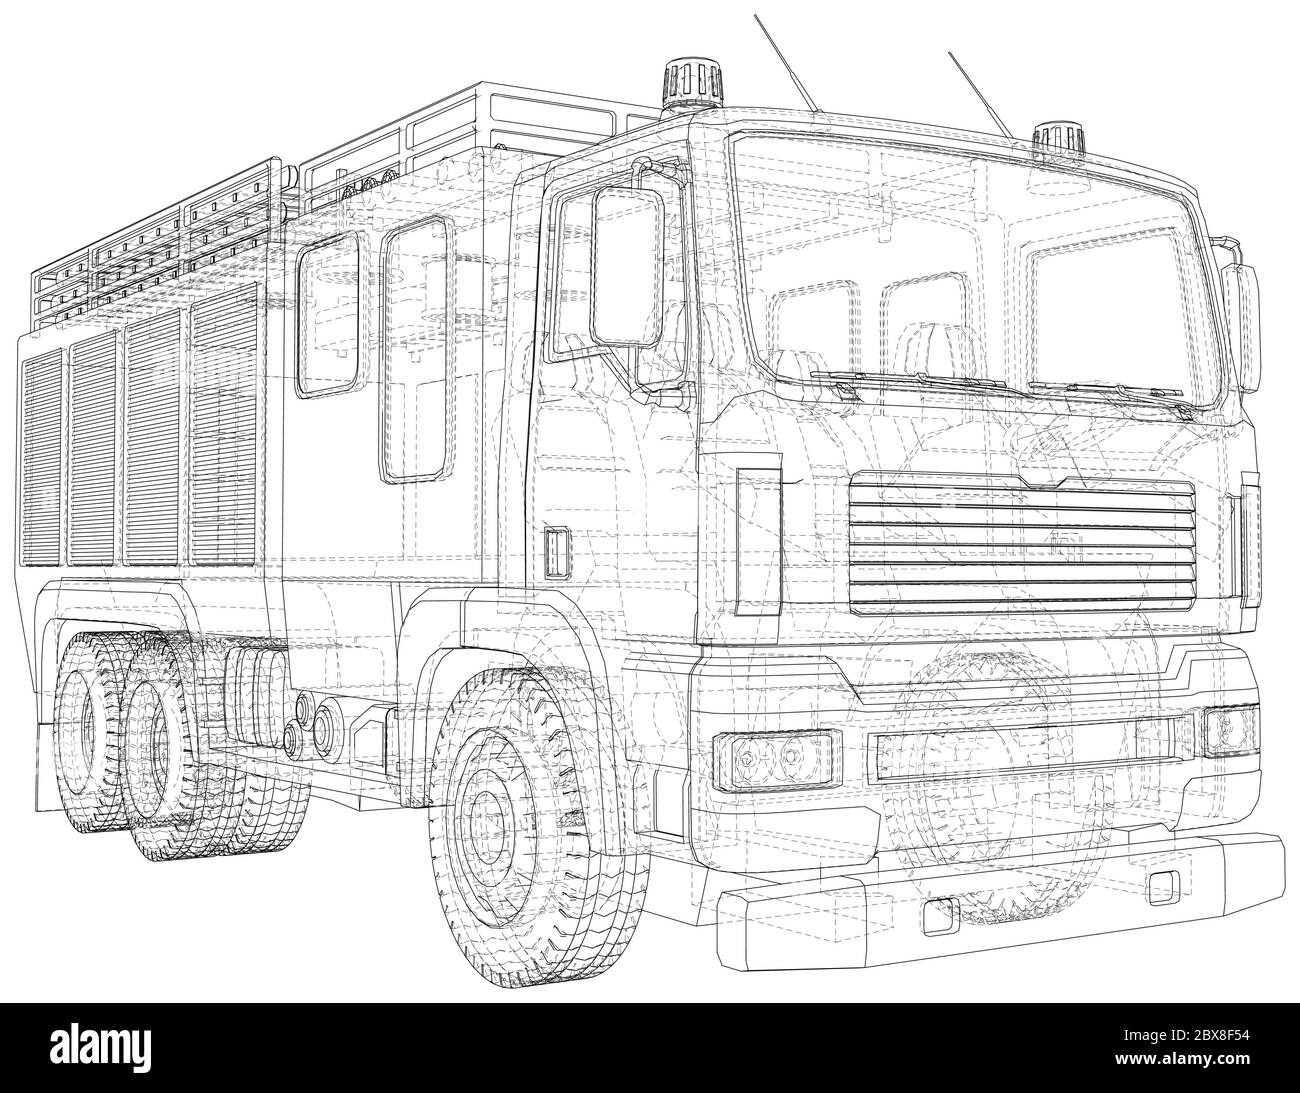 Fire Truck Drawing  How To Draw A Fire Truck Step By Step